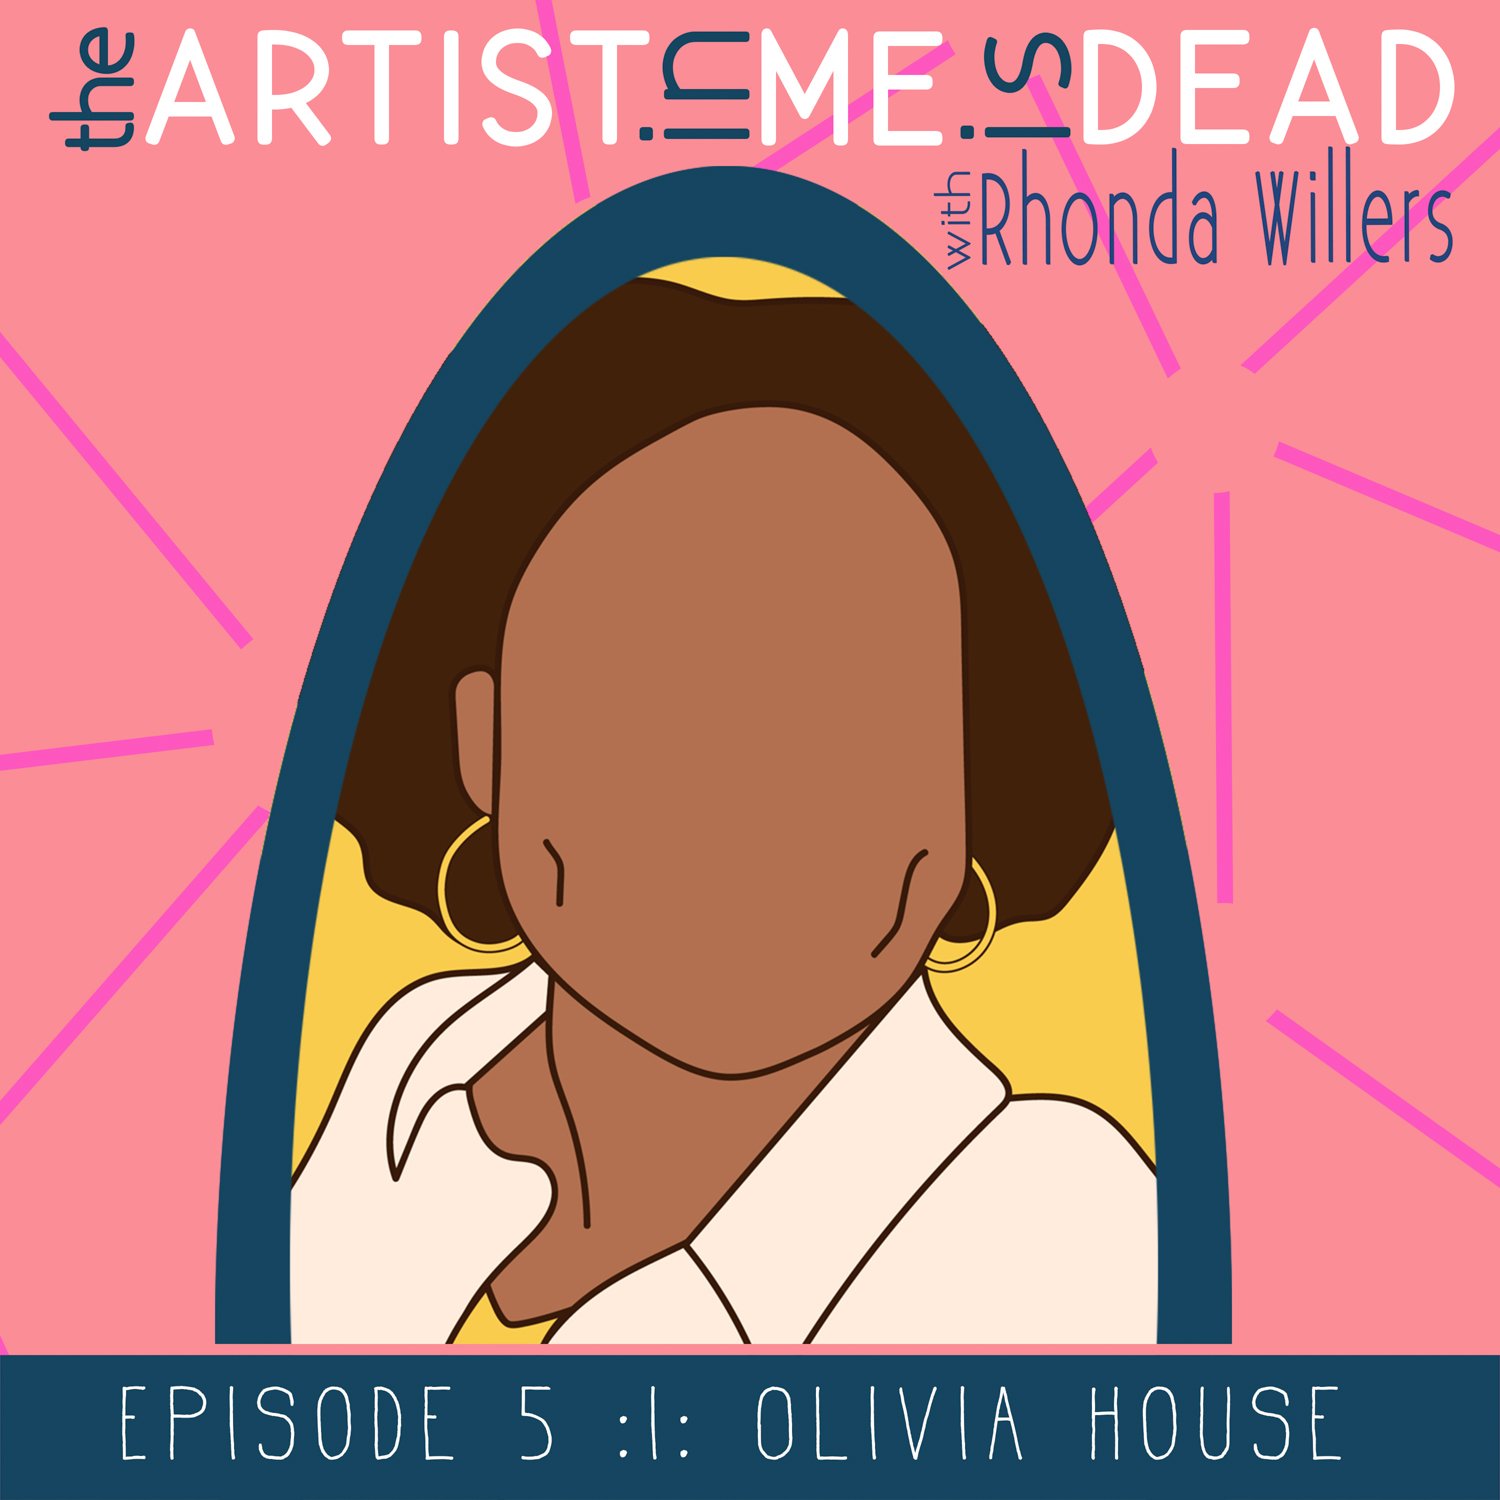 01_episode5_olivia_house_the-artist-in-me-is-dead-podcast_season1.jpeg